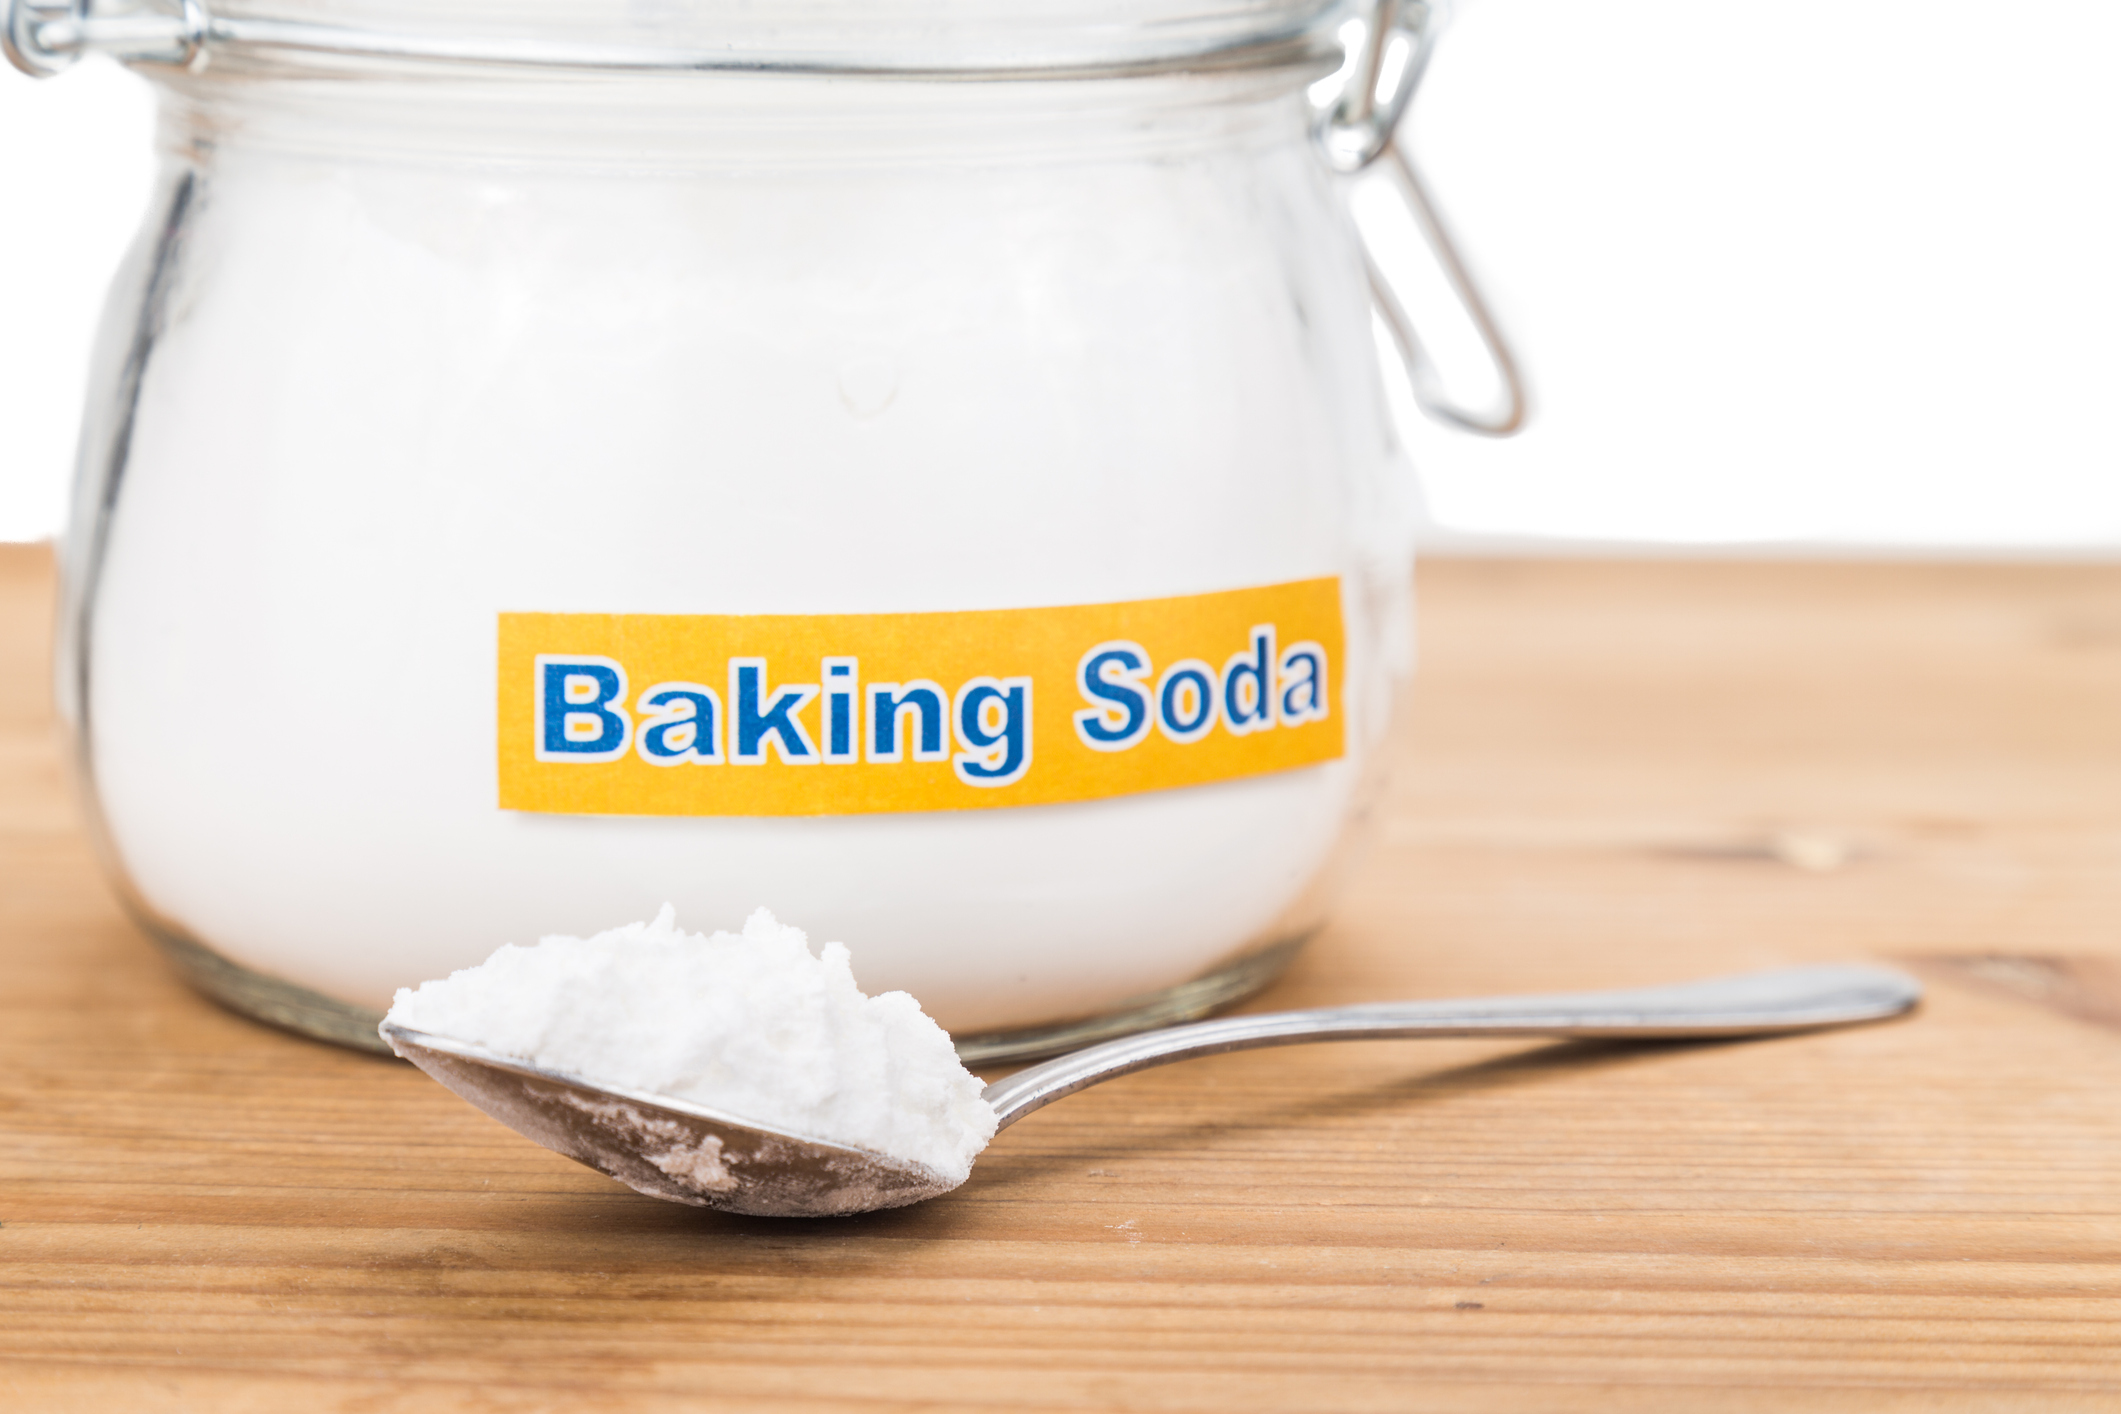 Jar and spoonful of baking soda for multiple holistic usages